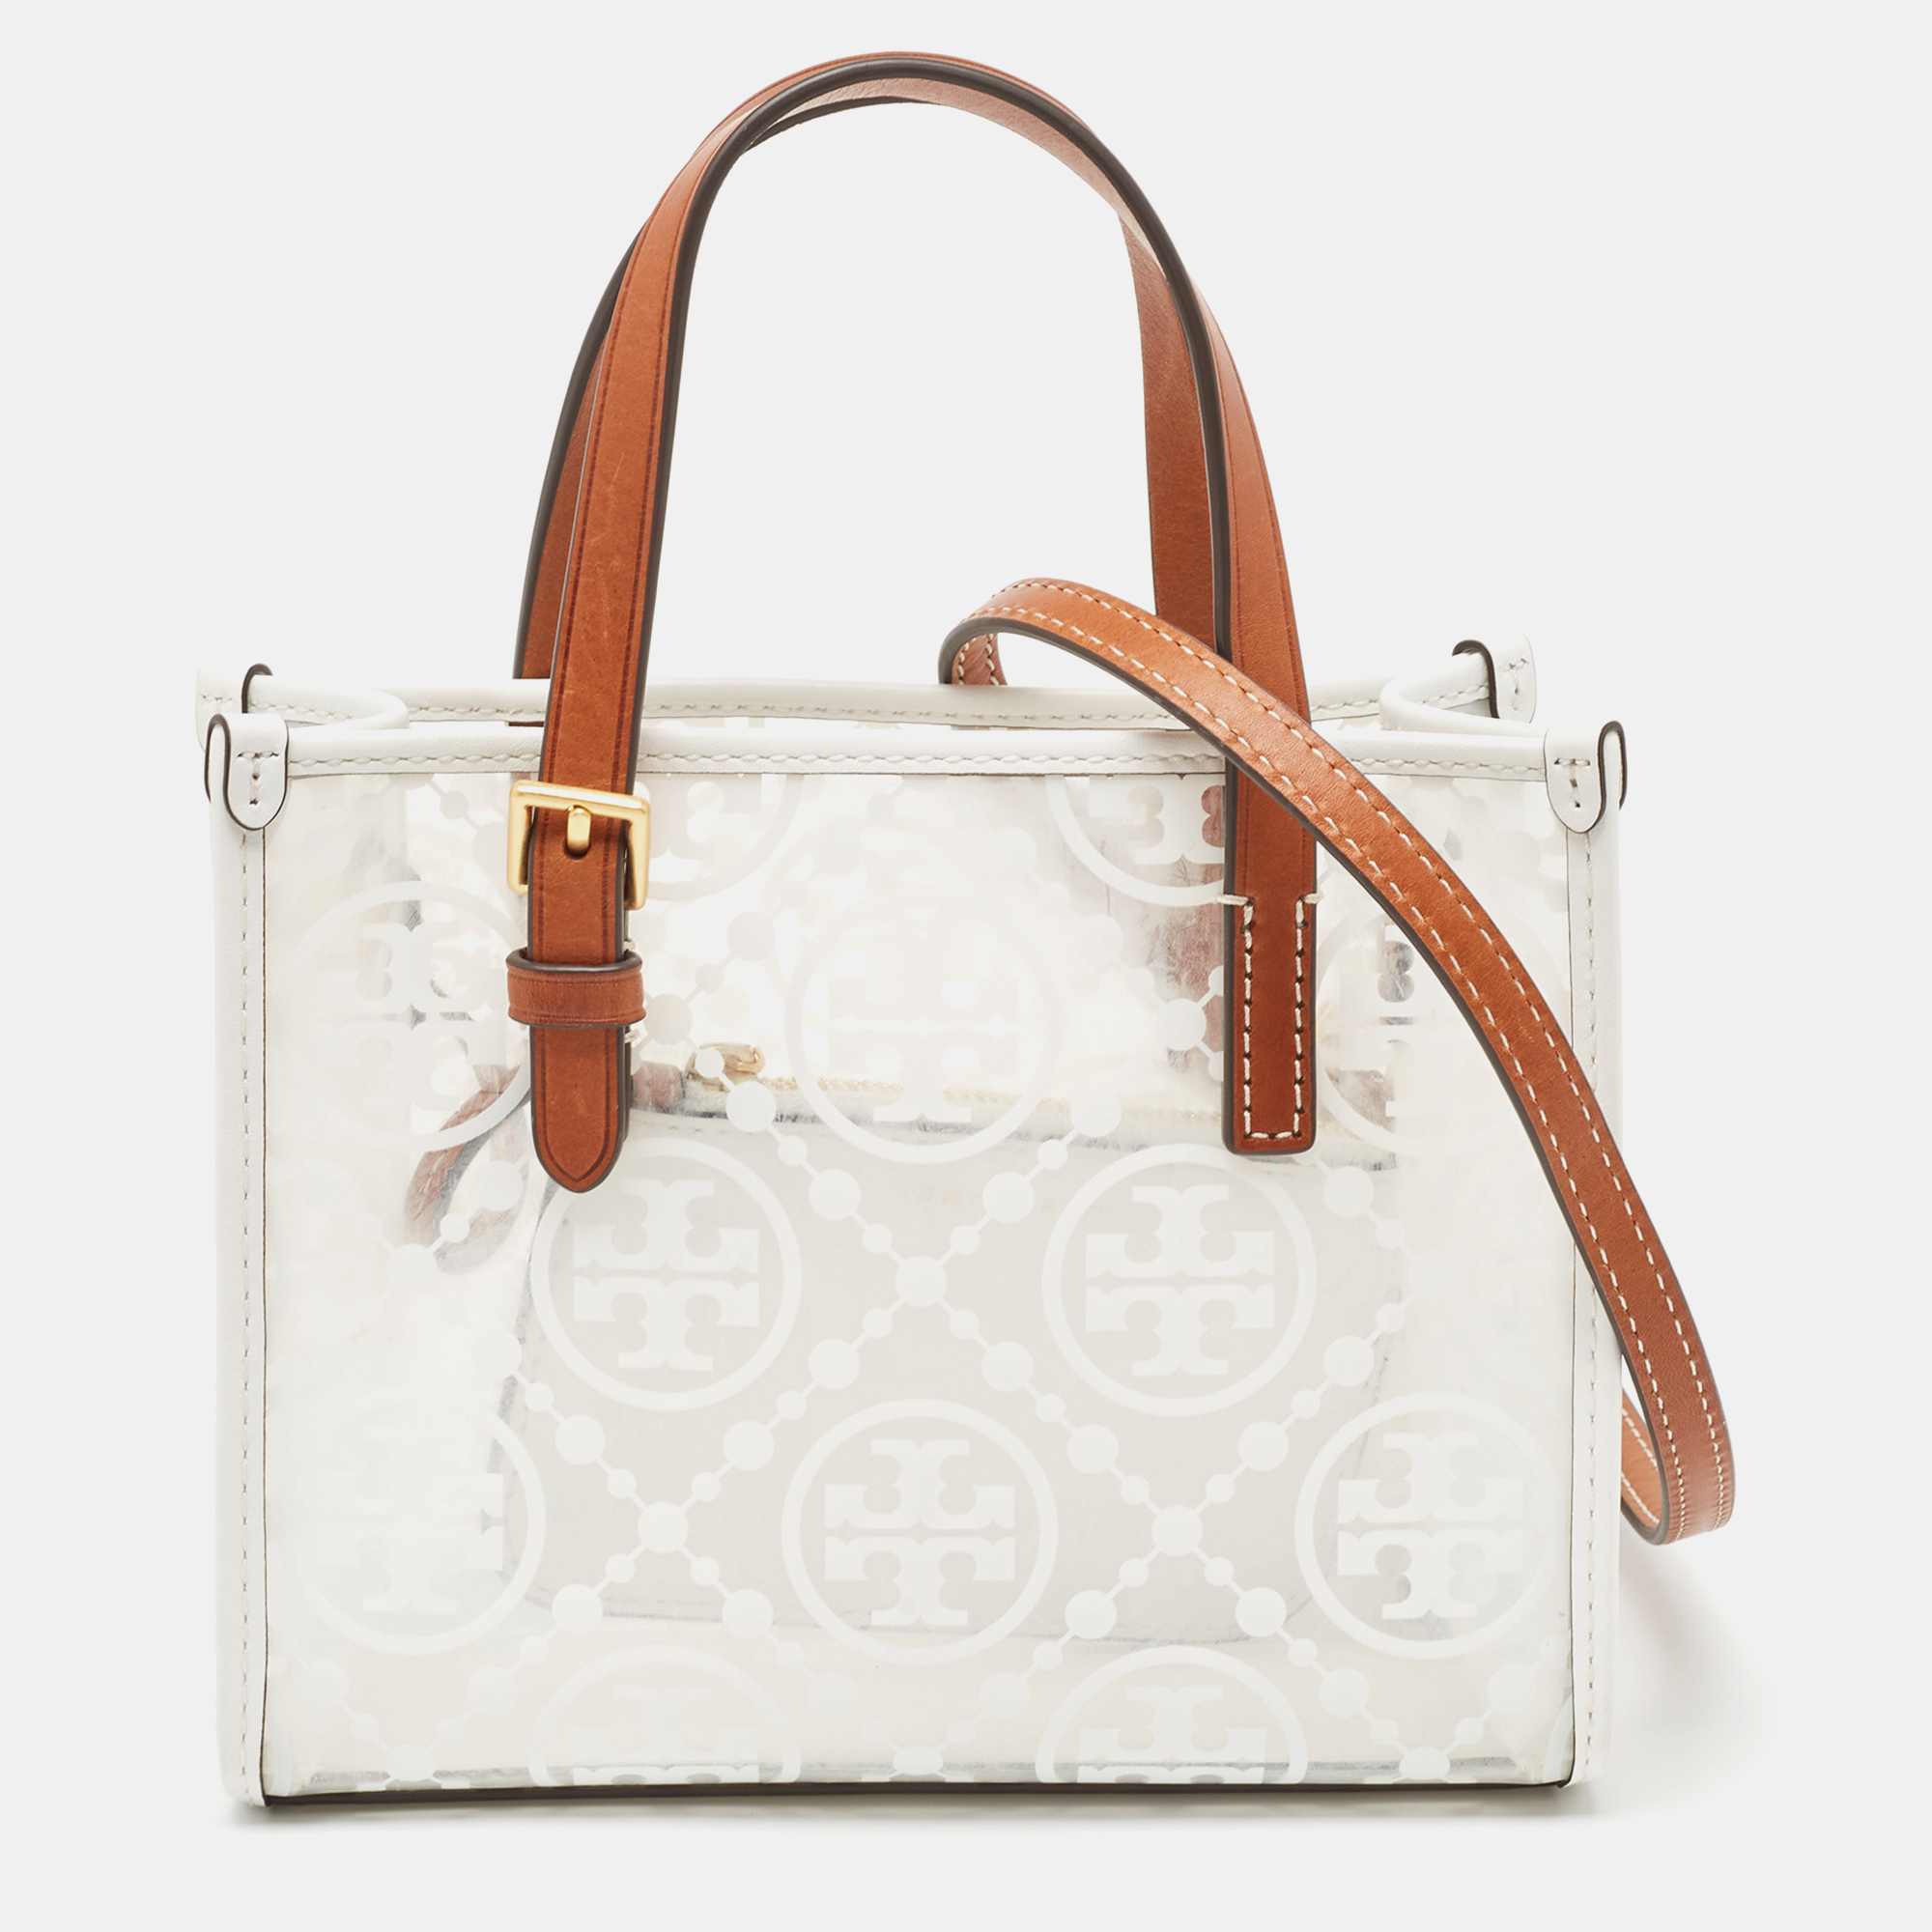 Tory Burch White/Tan Signature PVC And Leather Tote